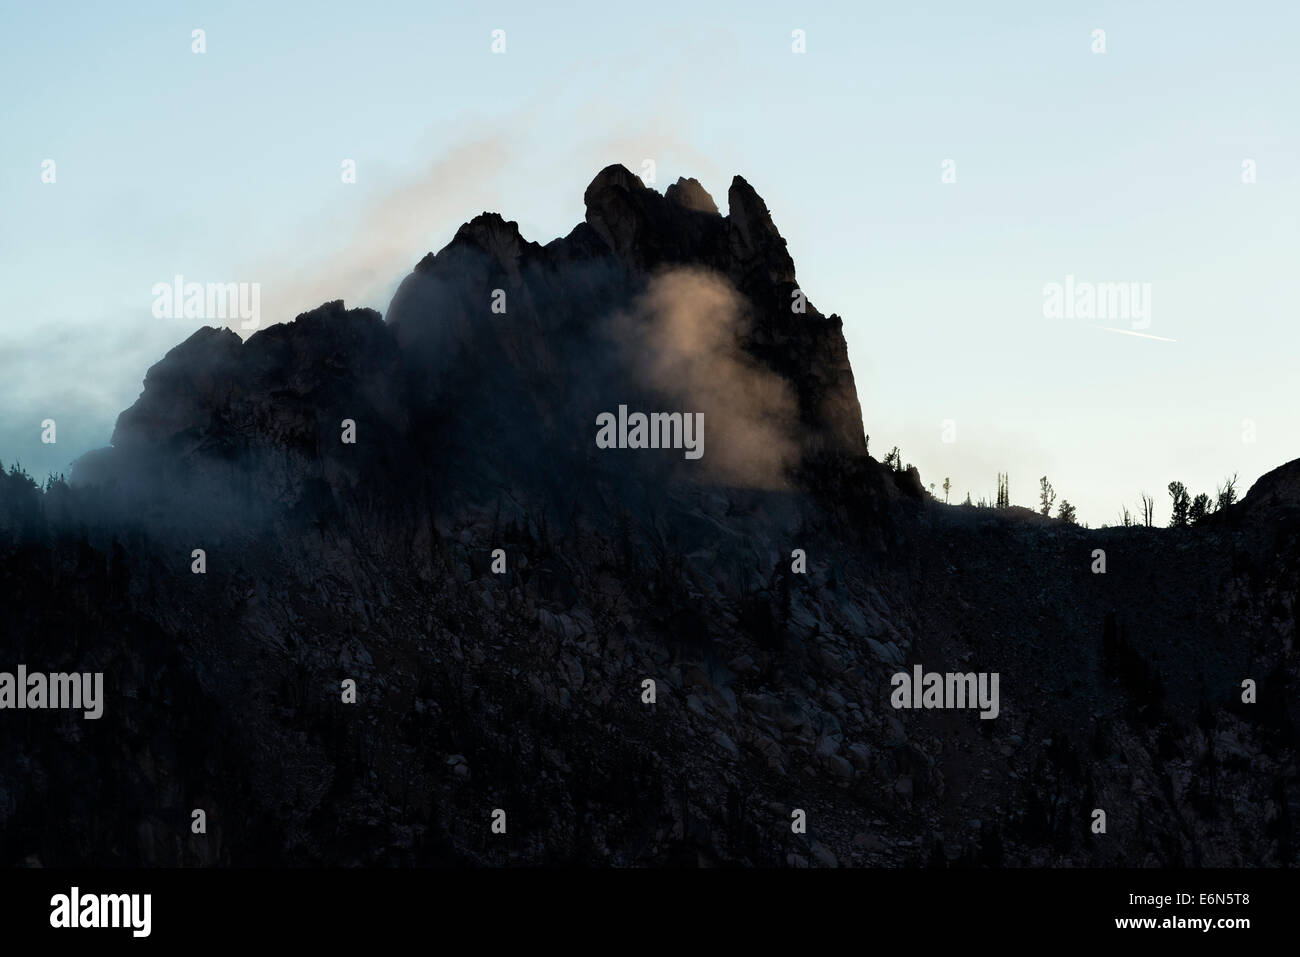 A peak in the Sawtooth Mountains with mists at sunset. Stock Photo